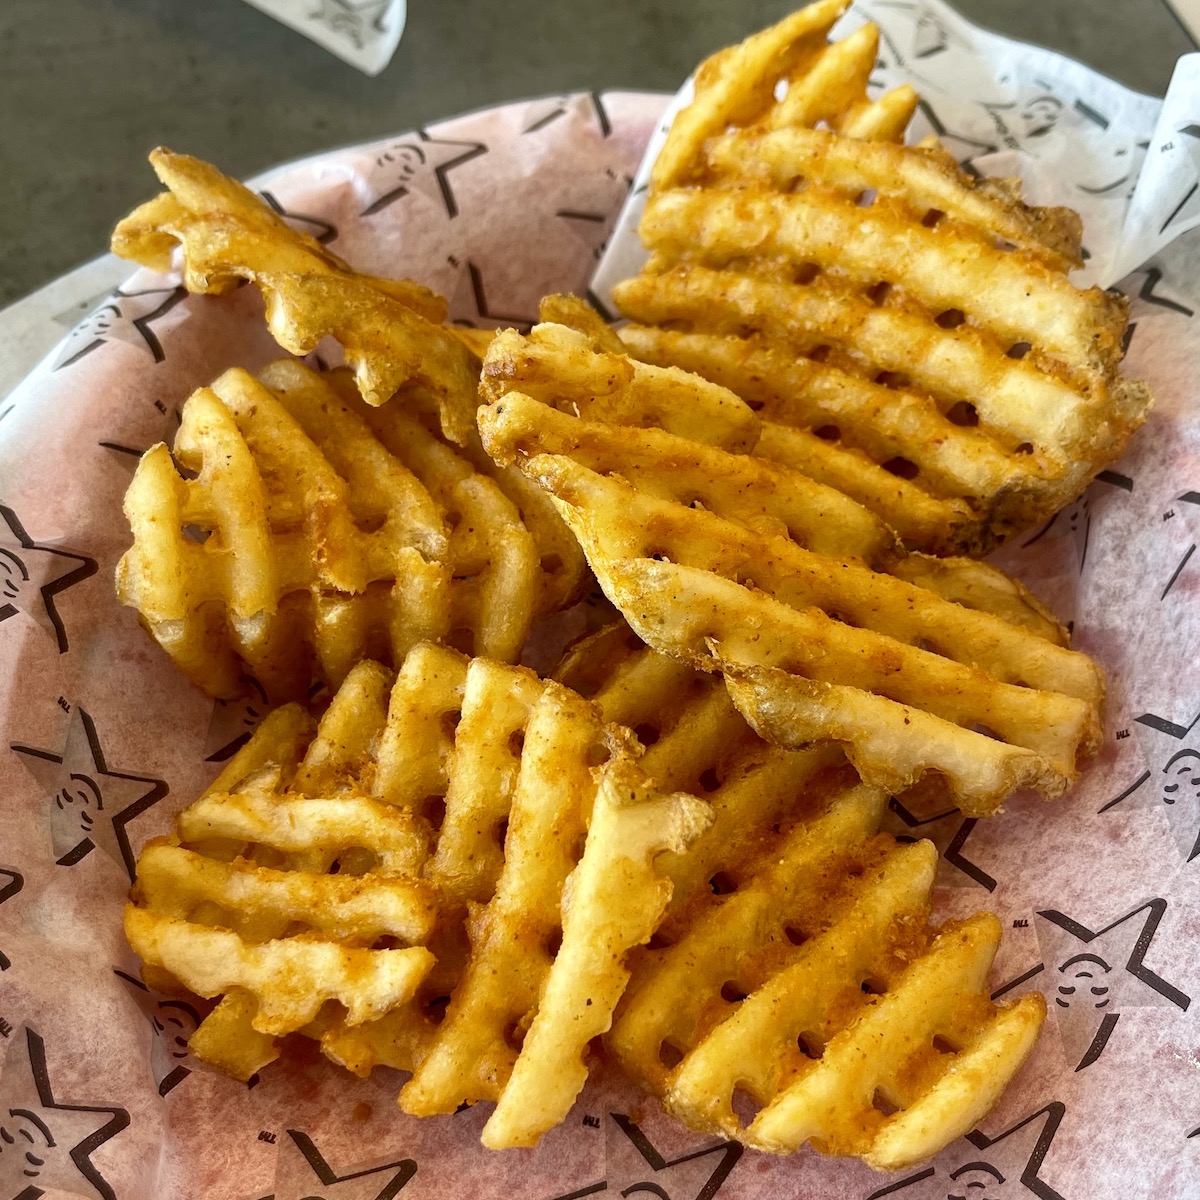 Waffle Fries from Carl's Jr. in Doral, Florida